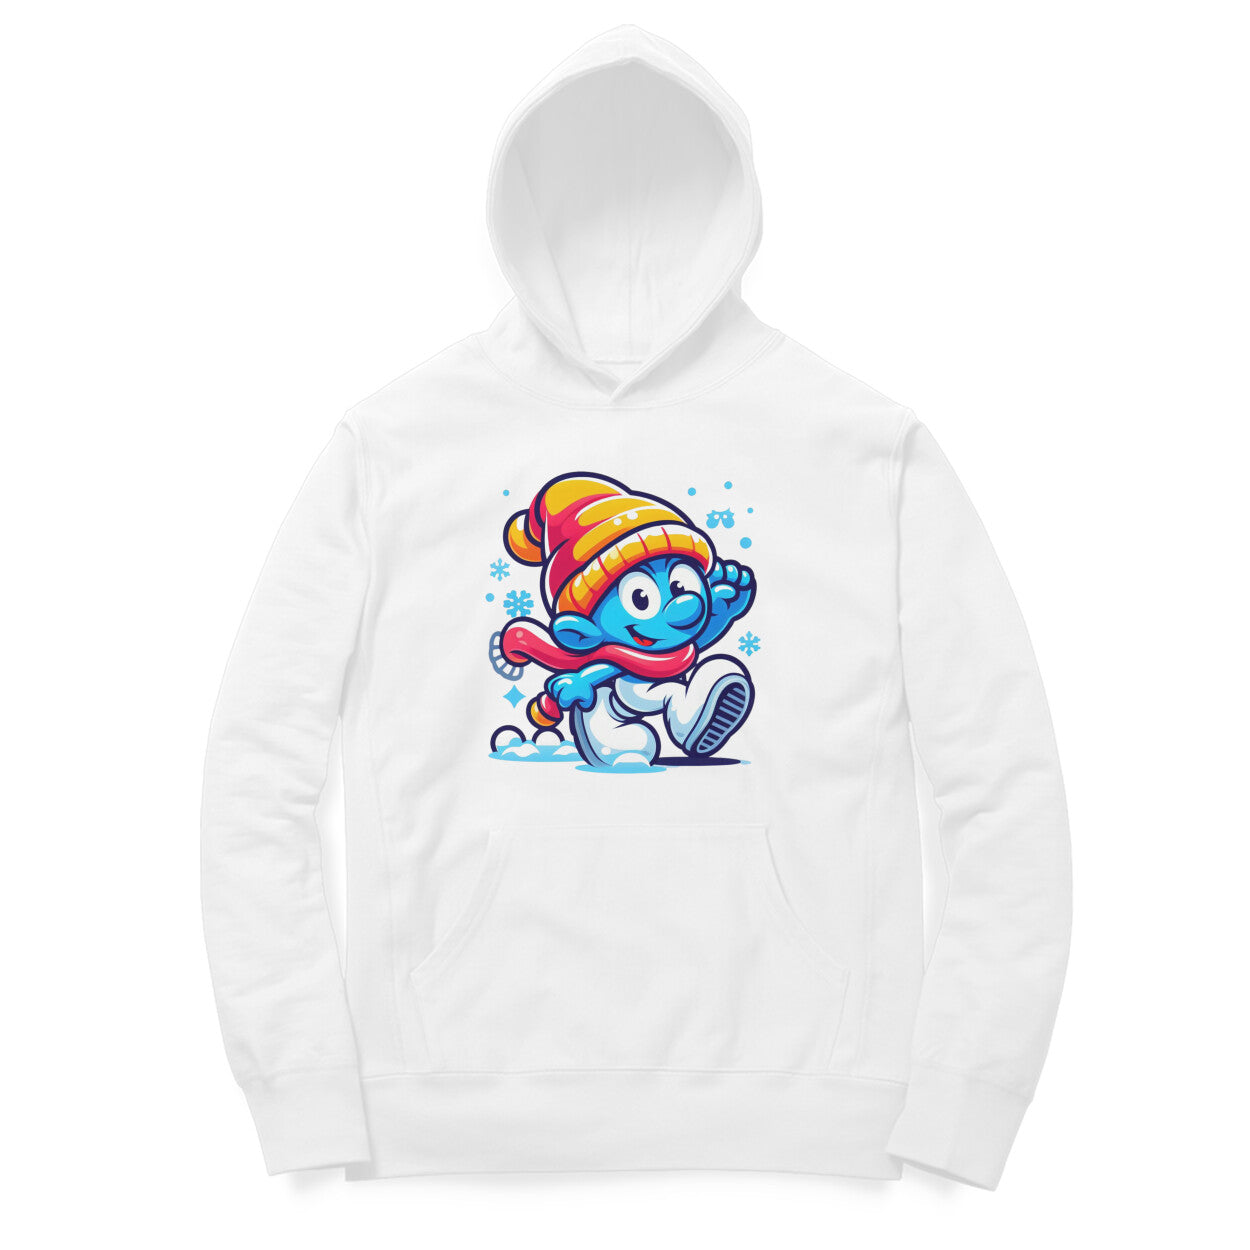 Smurf-themed Unisex Printed Hoodie - Playful and Stylish Design